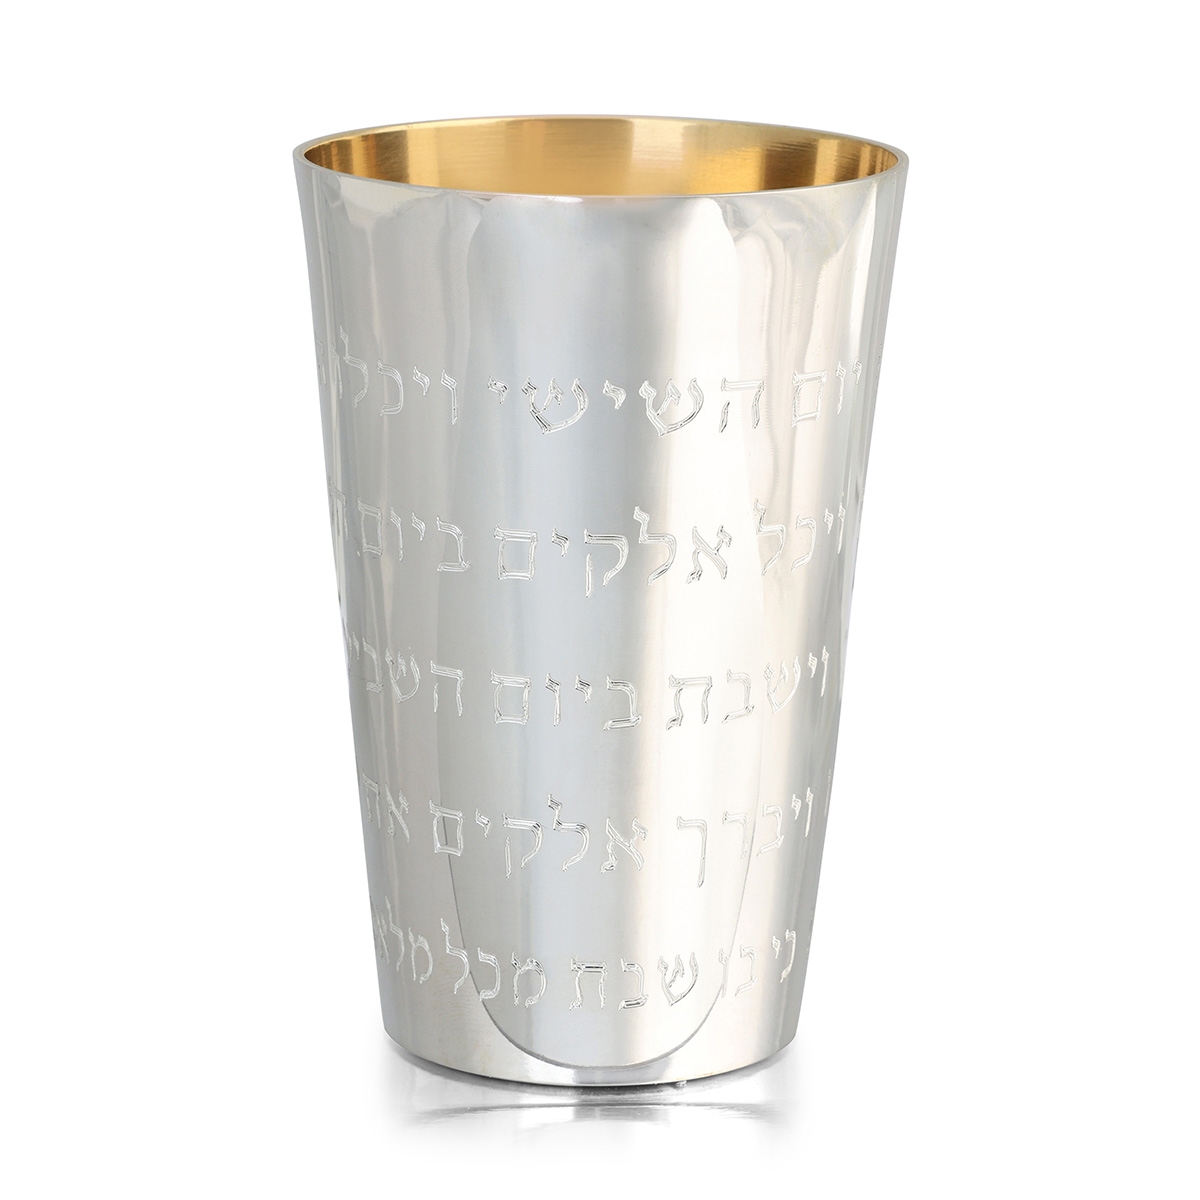 Sterling Silver Kiddush Cup with Inscribed Verses - 1